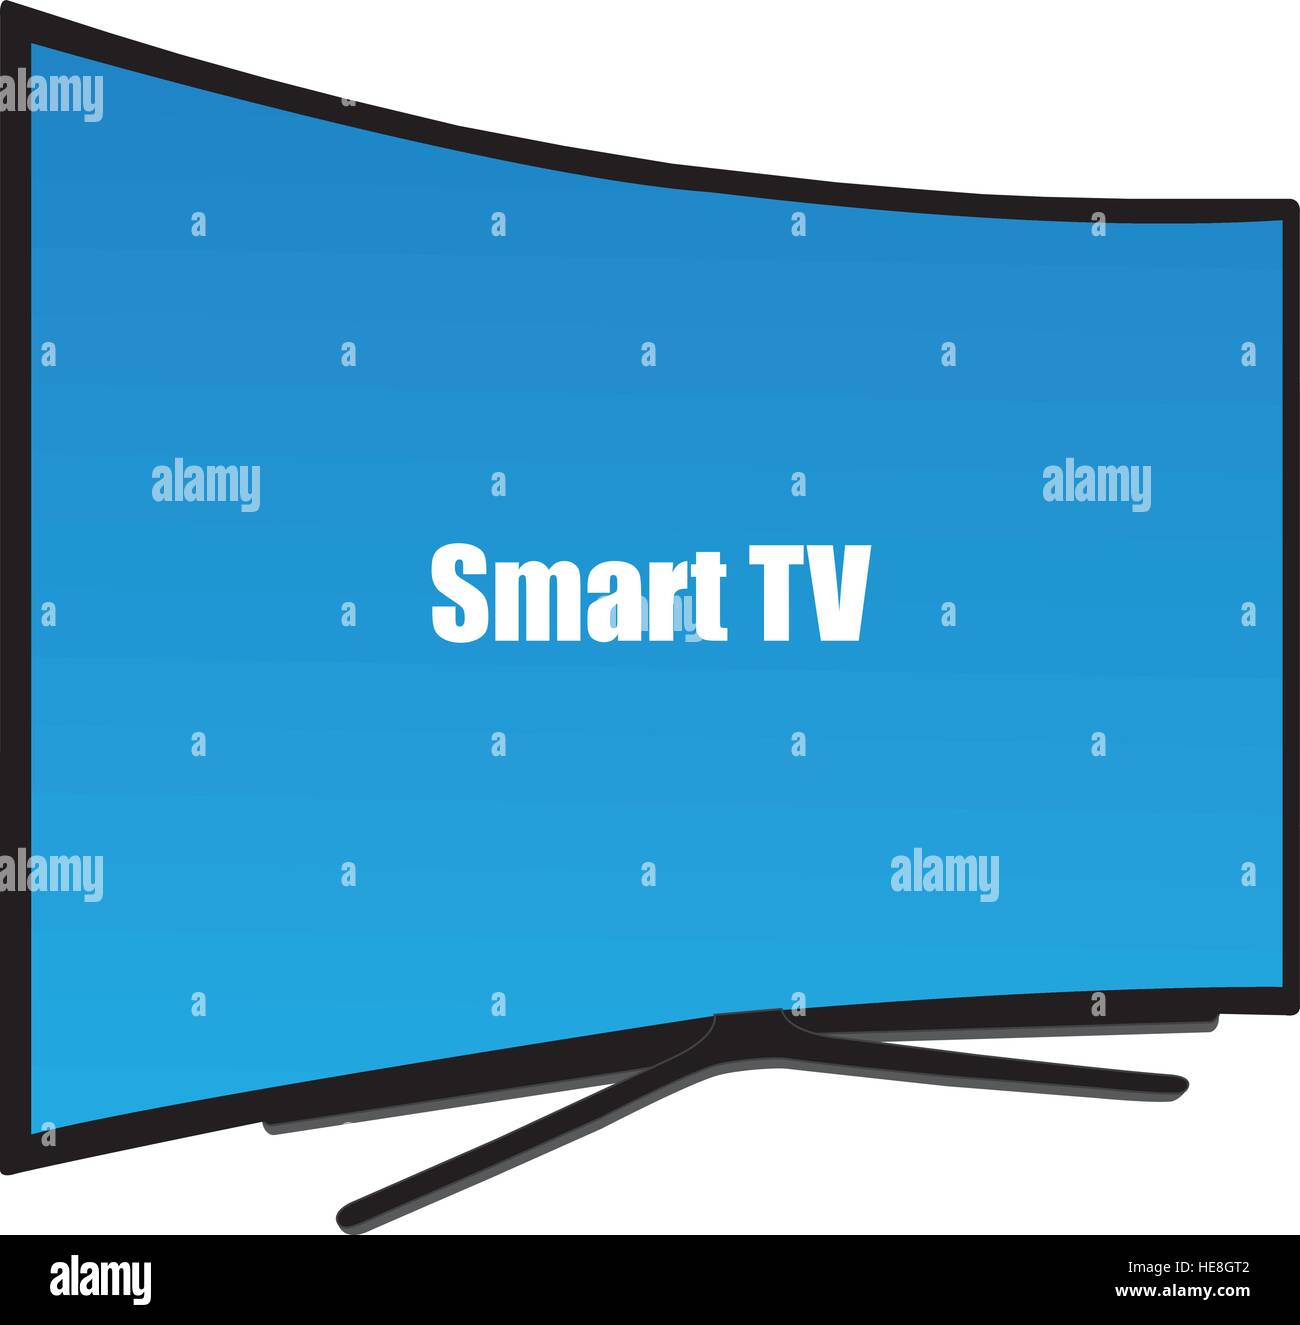 Smart curved television Stock Vector